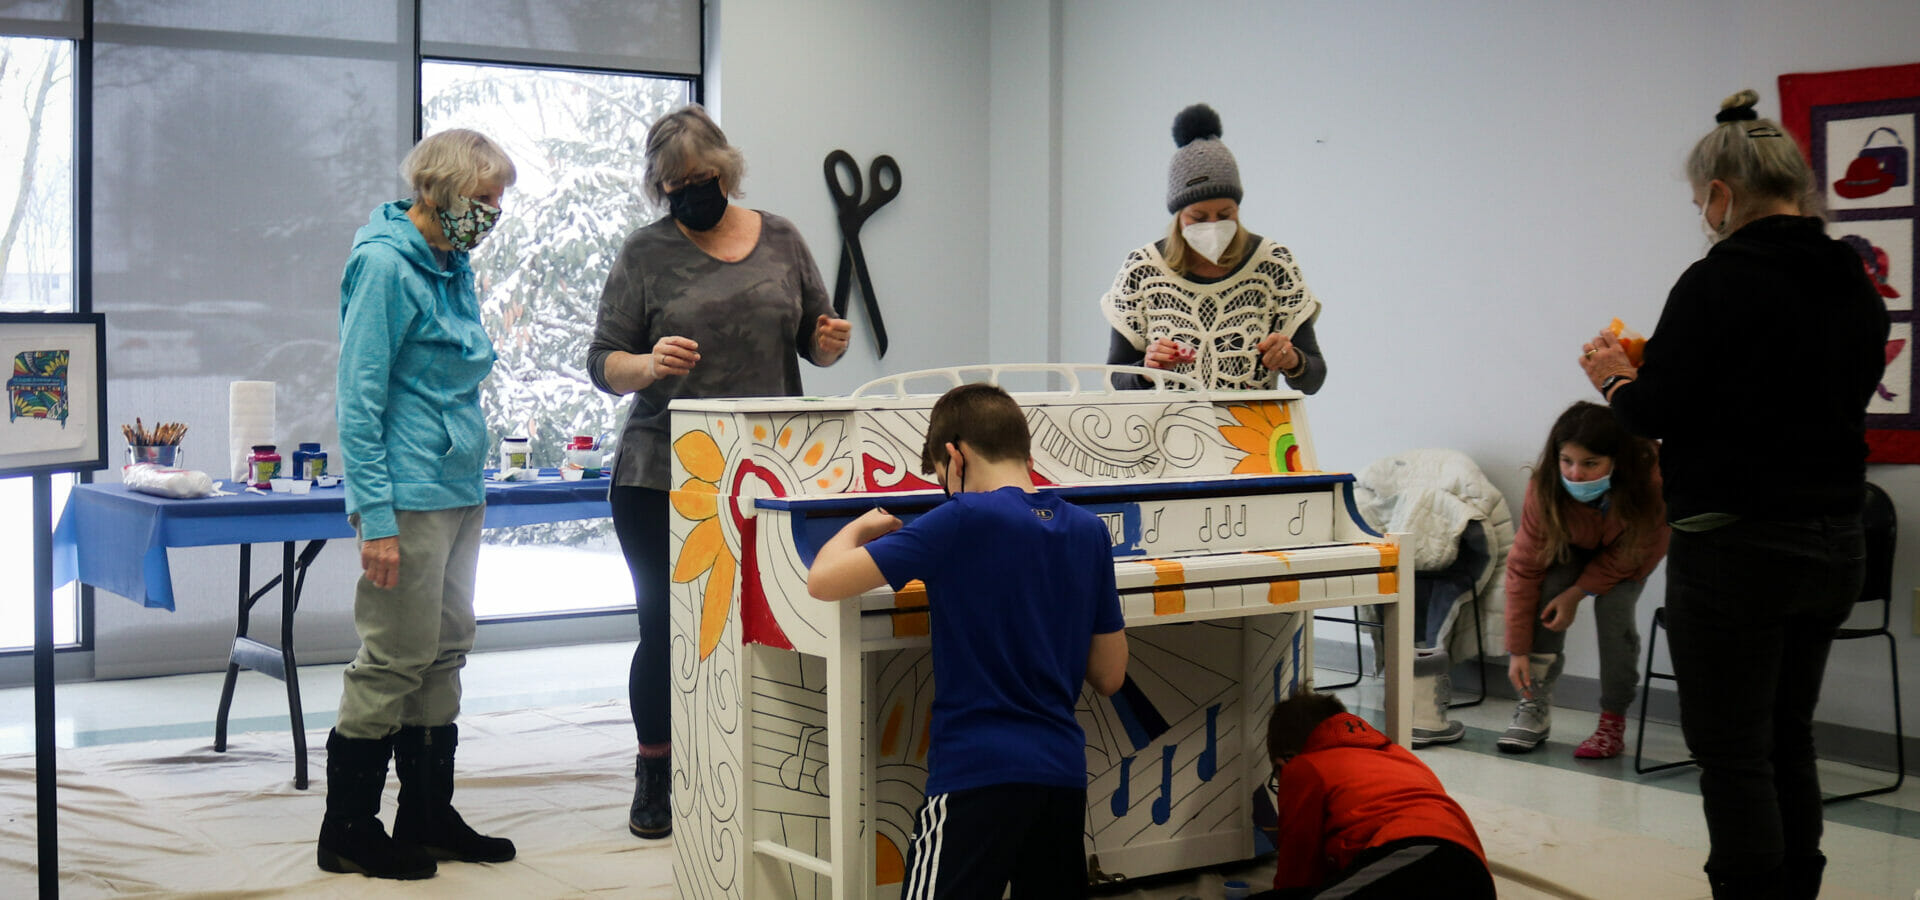 volunteers painting a piano.